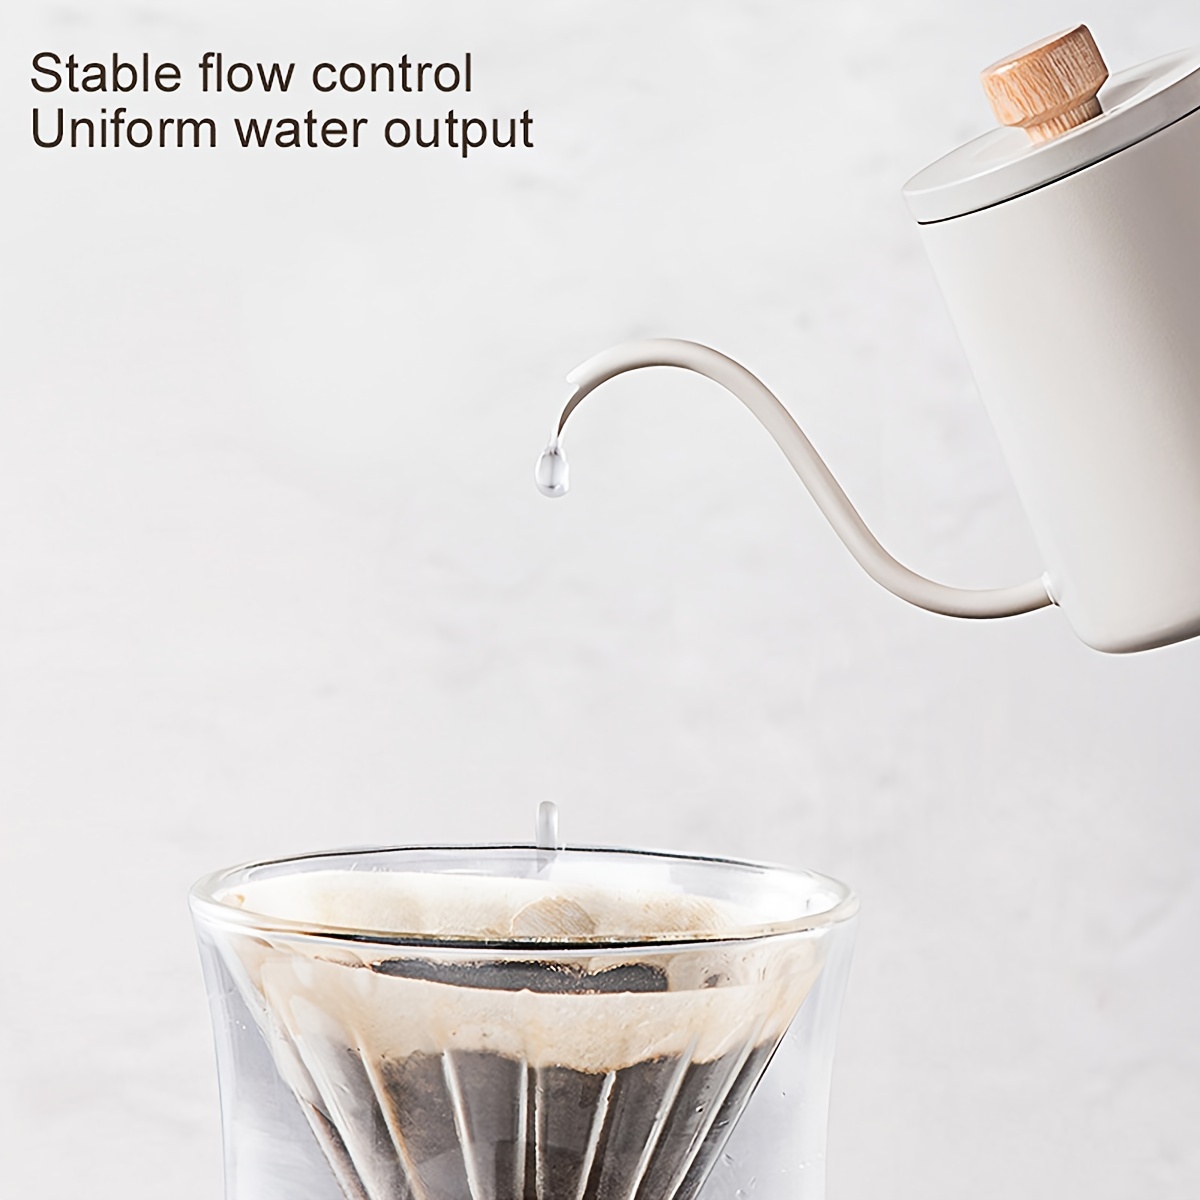  Hario V60 Drip Coffee Pour Over Scale, Stainless Steel